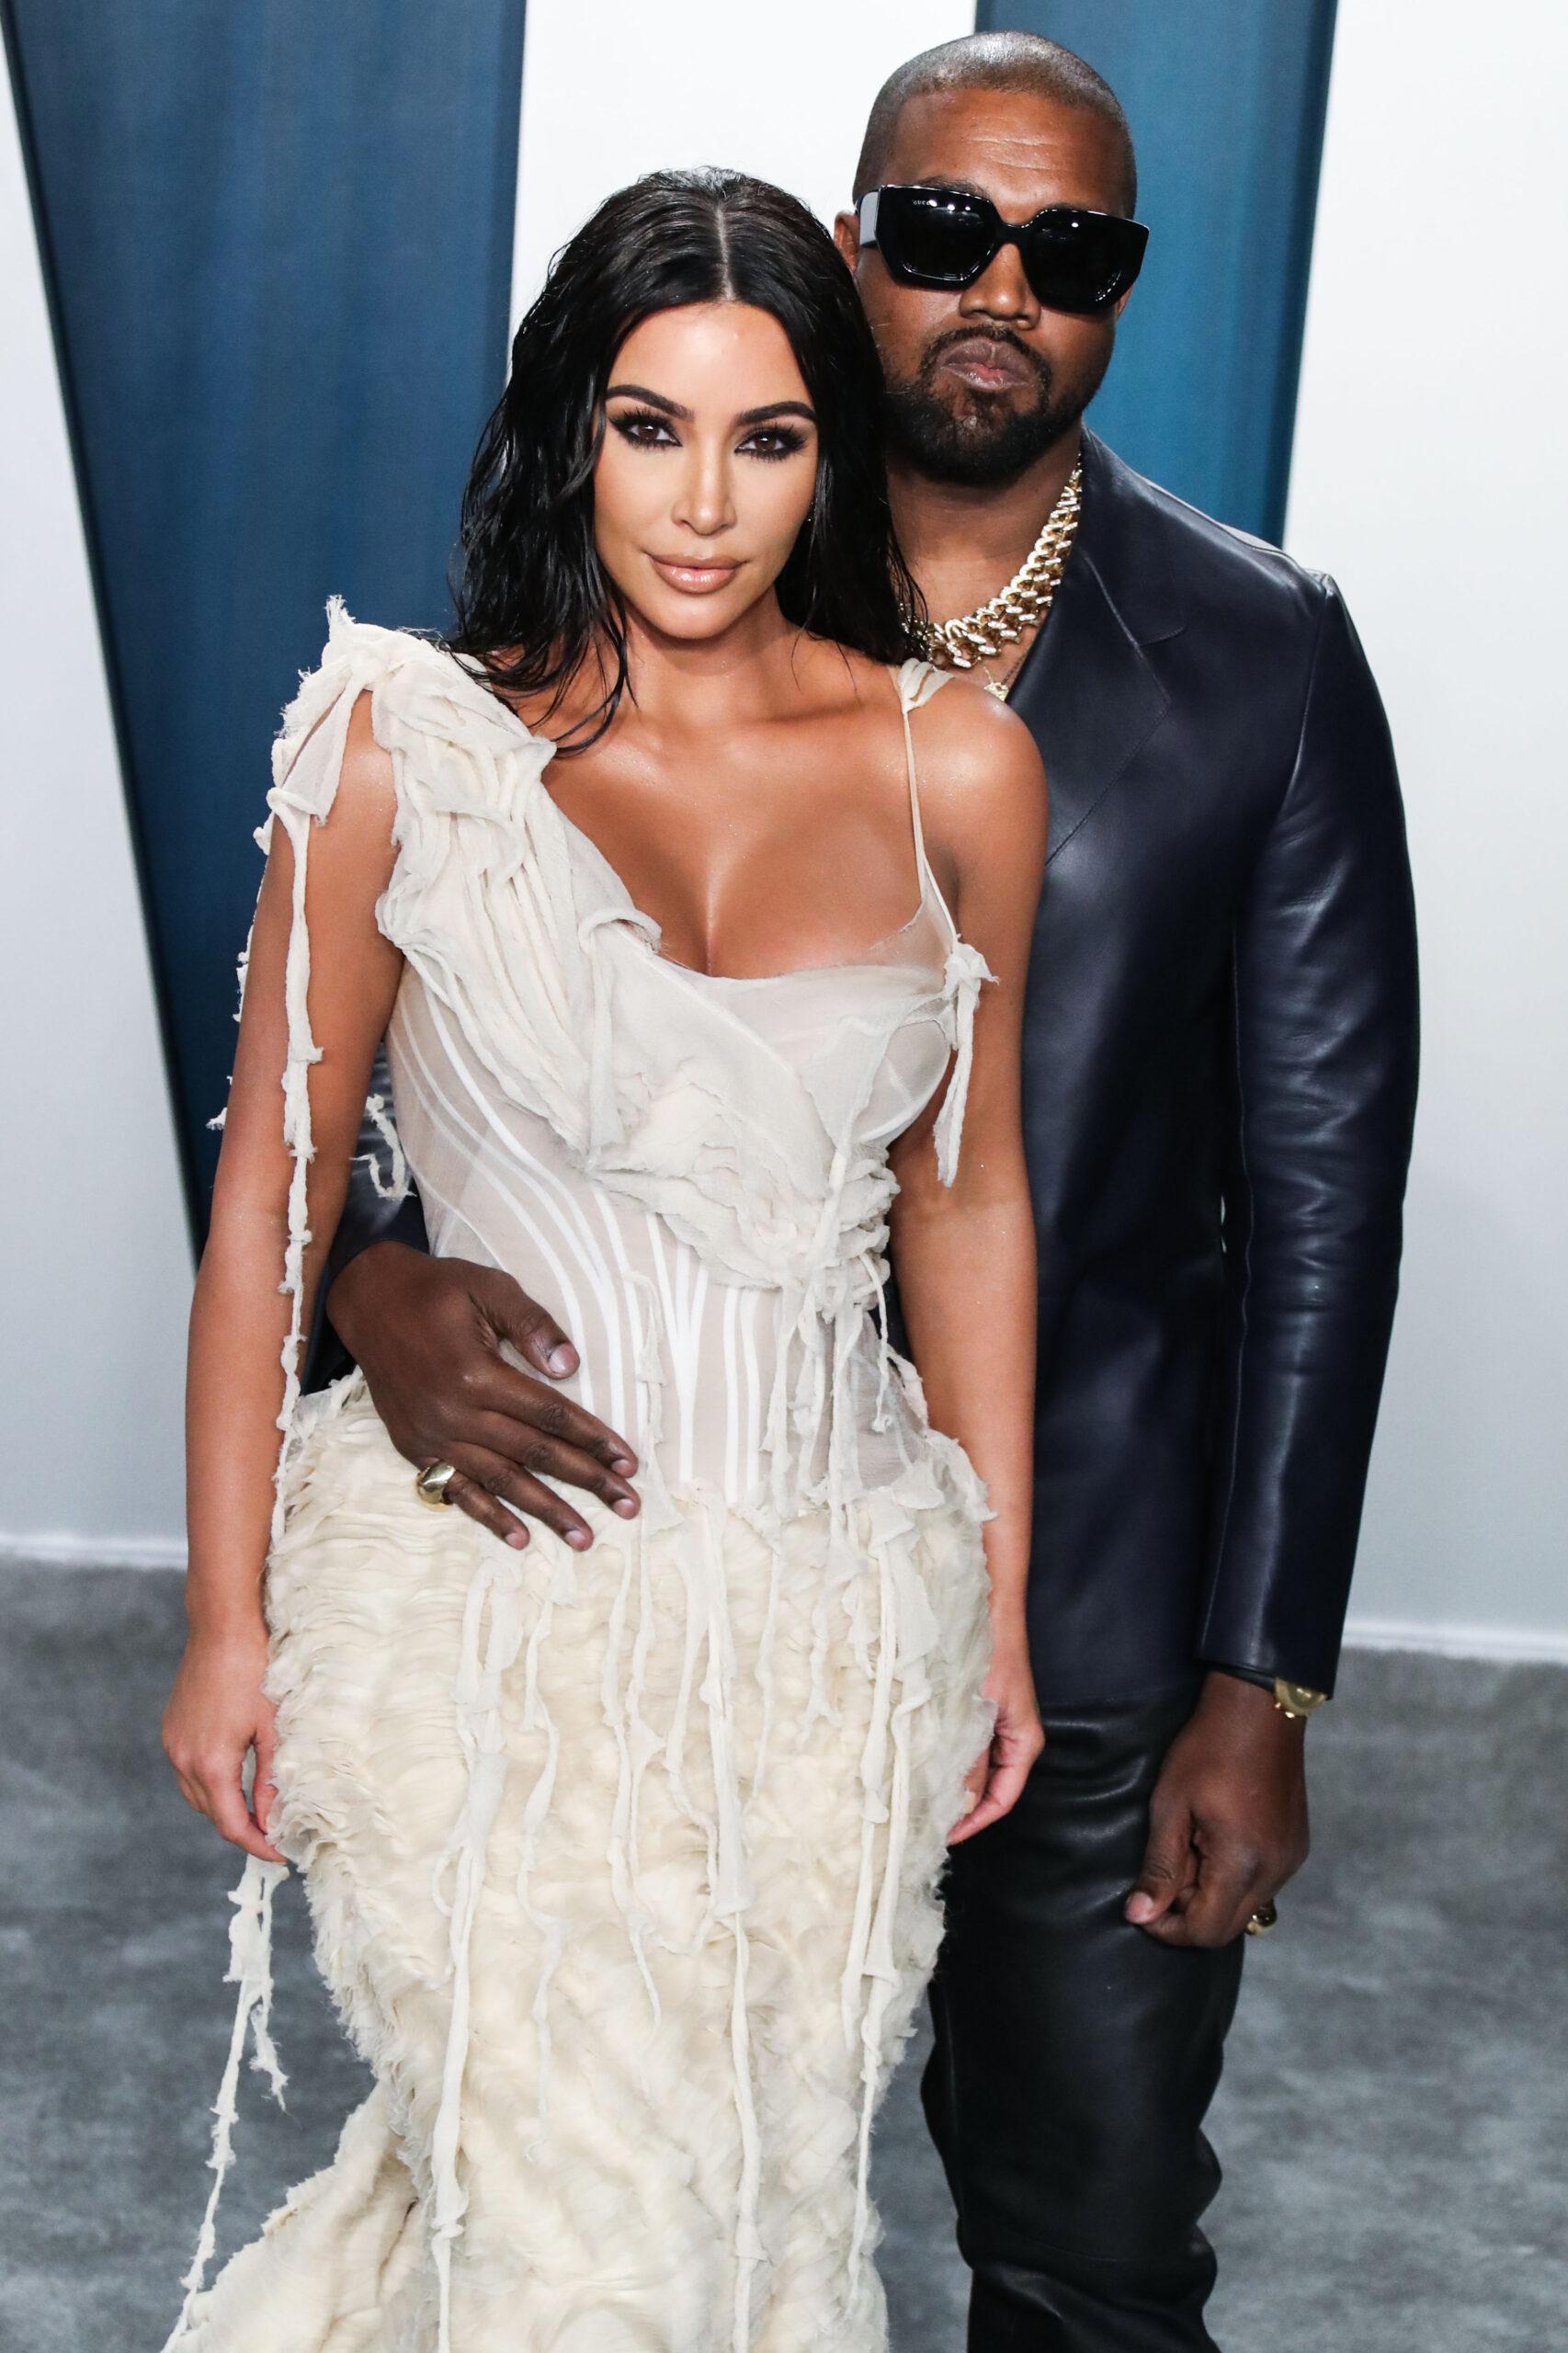 Kanye West Breaks His Silence On Divorce, Let's Focus On 'Our Beautiful Children'